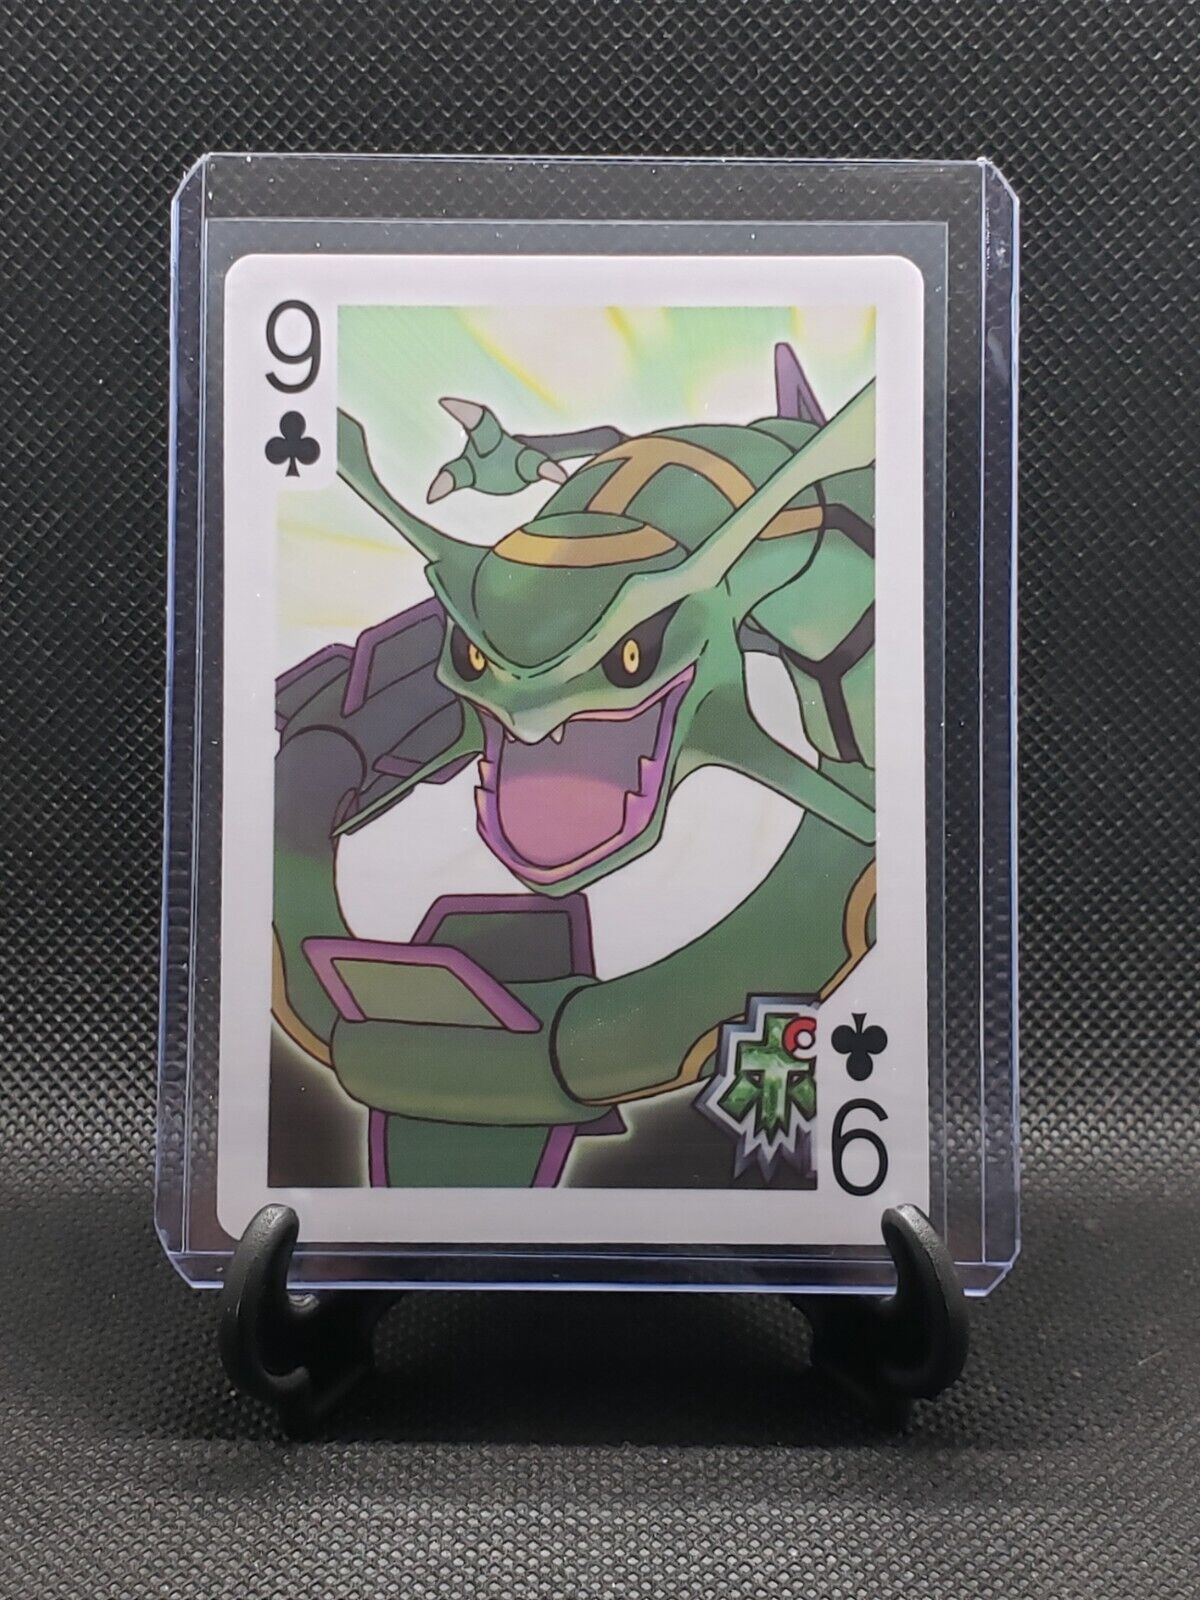 Rayquaza 9 of Clubs Pokemon TCG Playing Card Poker Card Nintendo Japanese NM/M